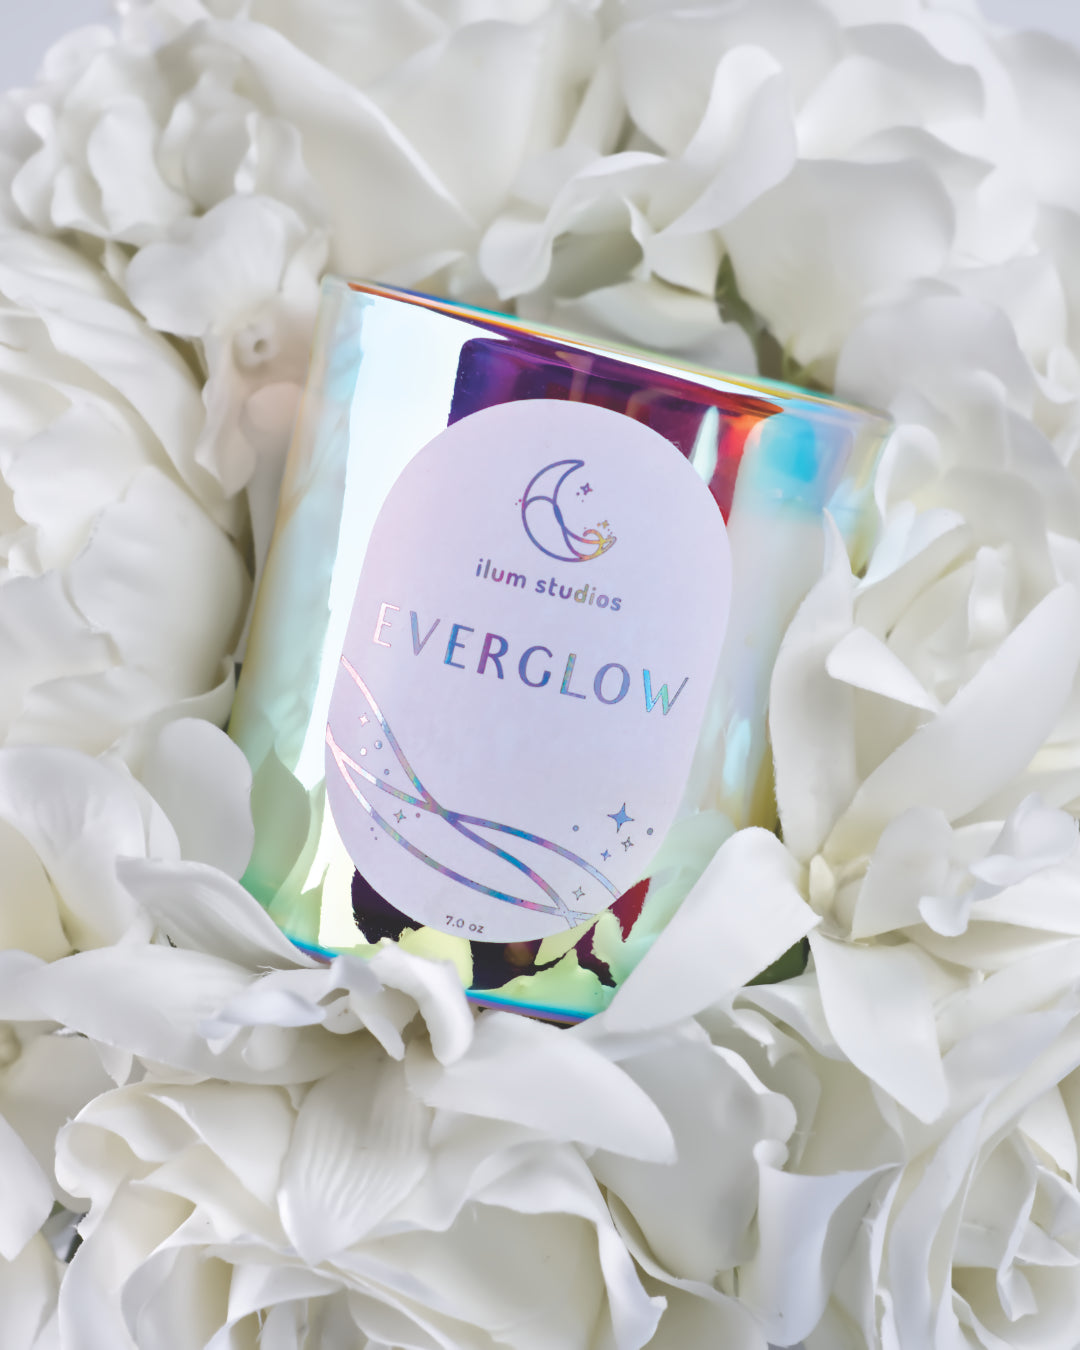 Everglow Candle